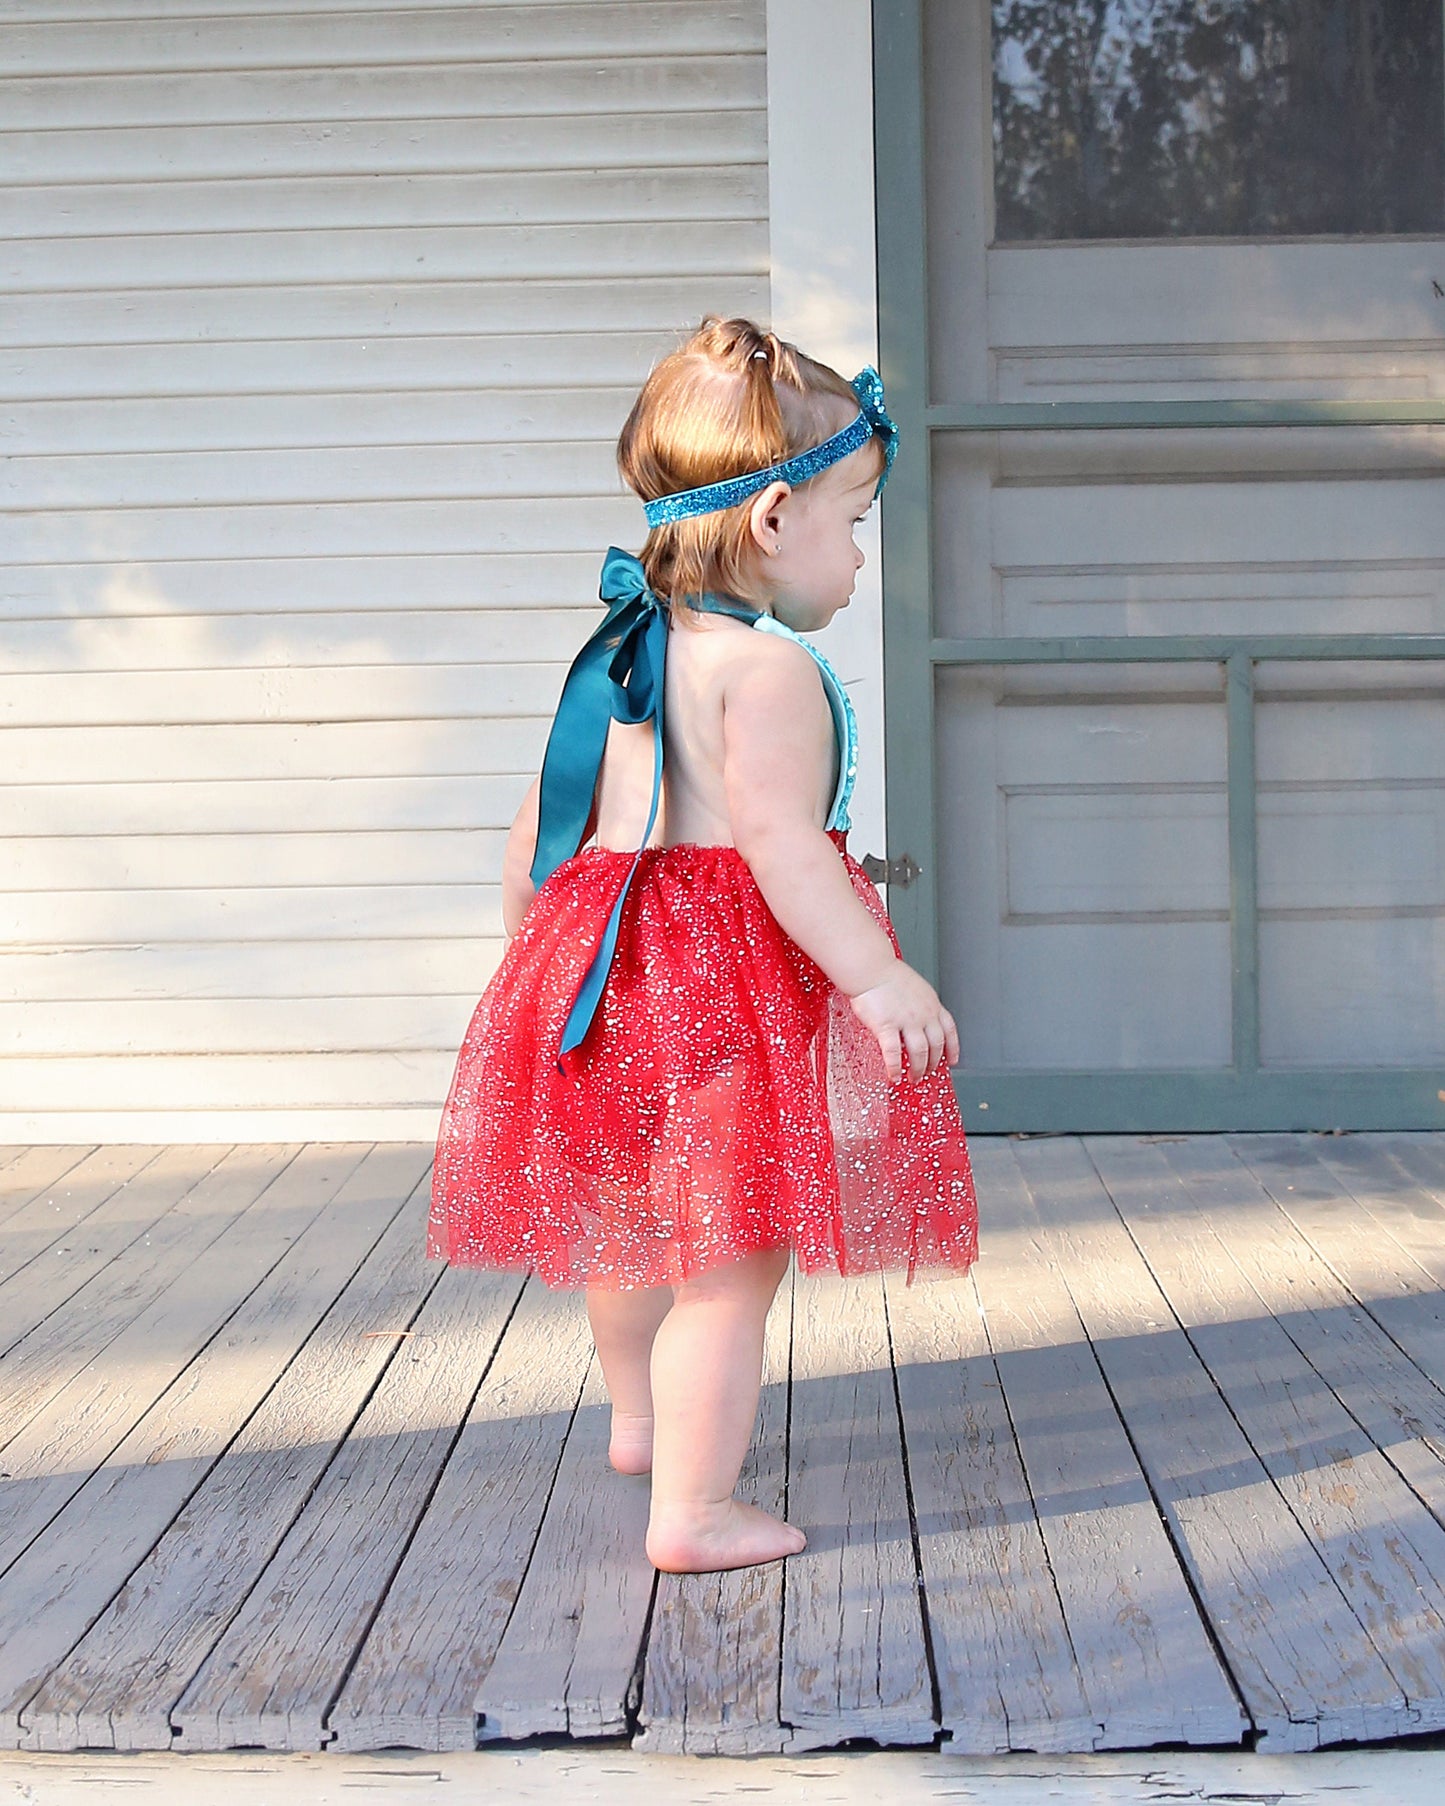 Romper - Tulle skirted, Skirted, Sequin Top Romper - Sequin Romper - Princess - Birthday Romper - Photoshoot - Red and Teal Romper